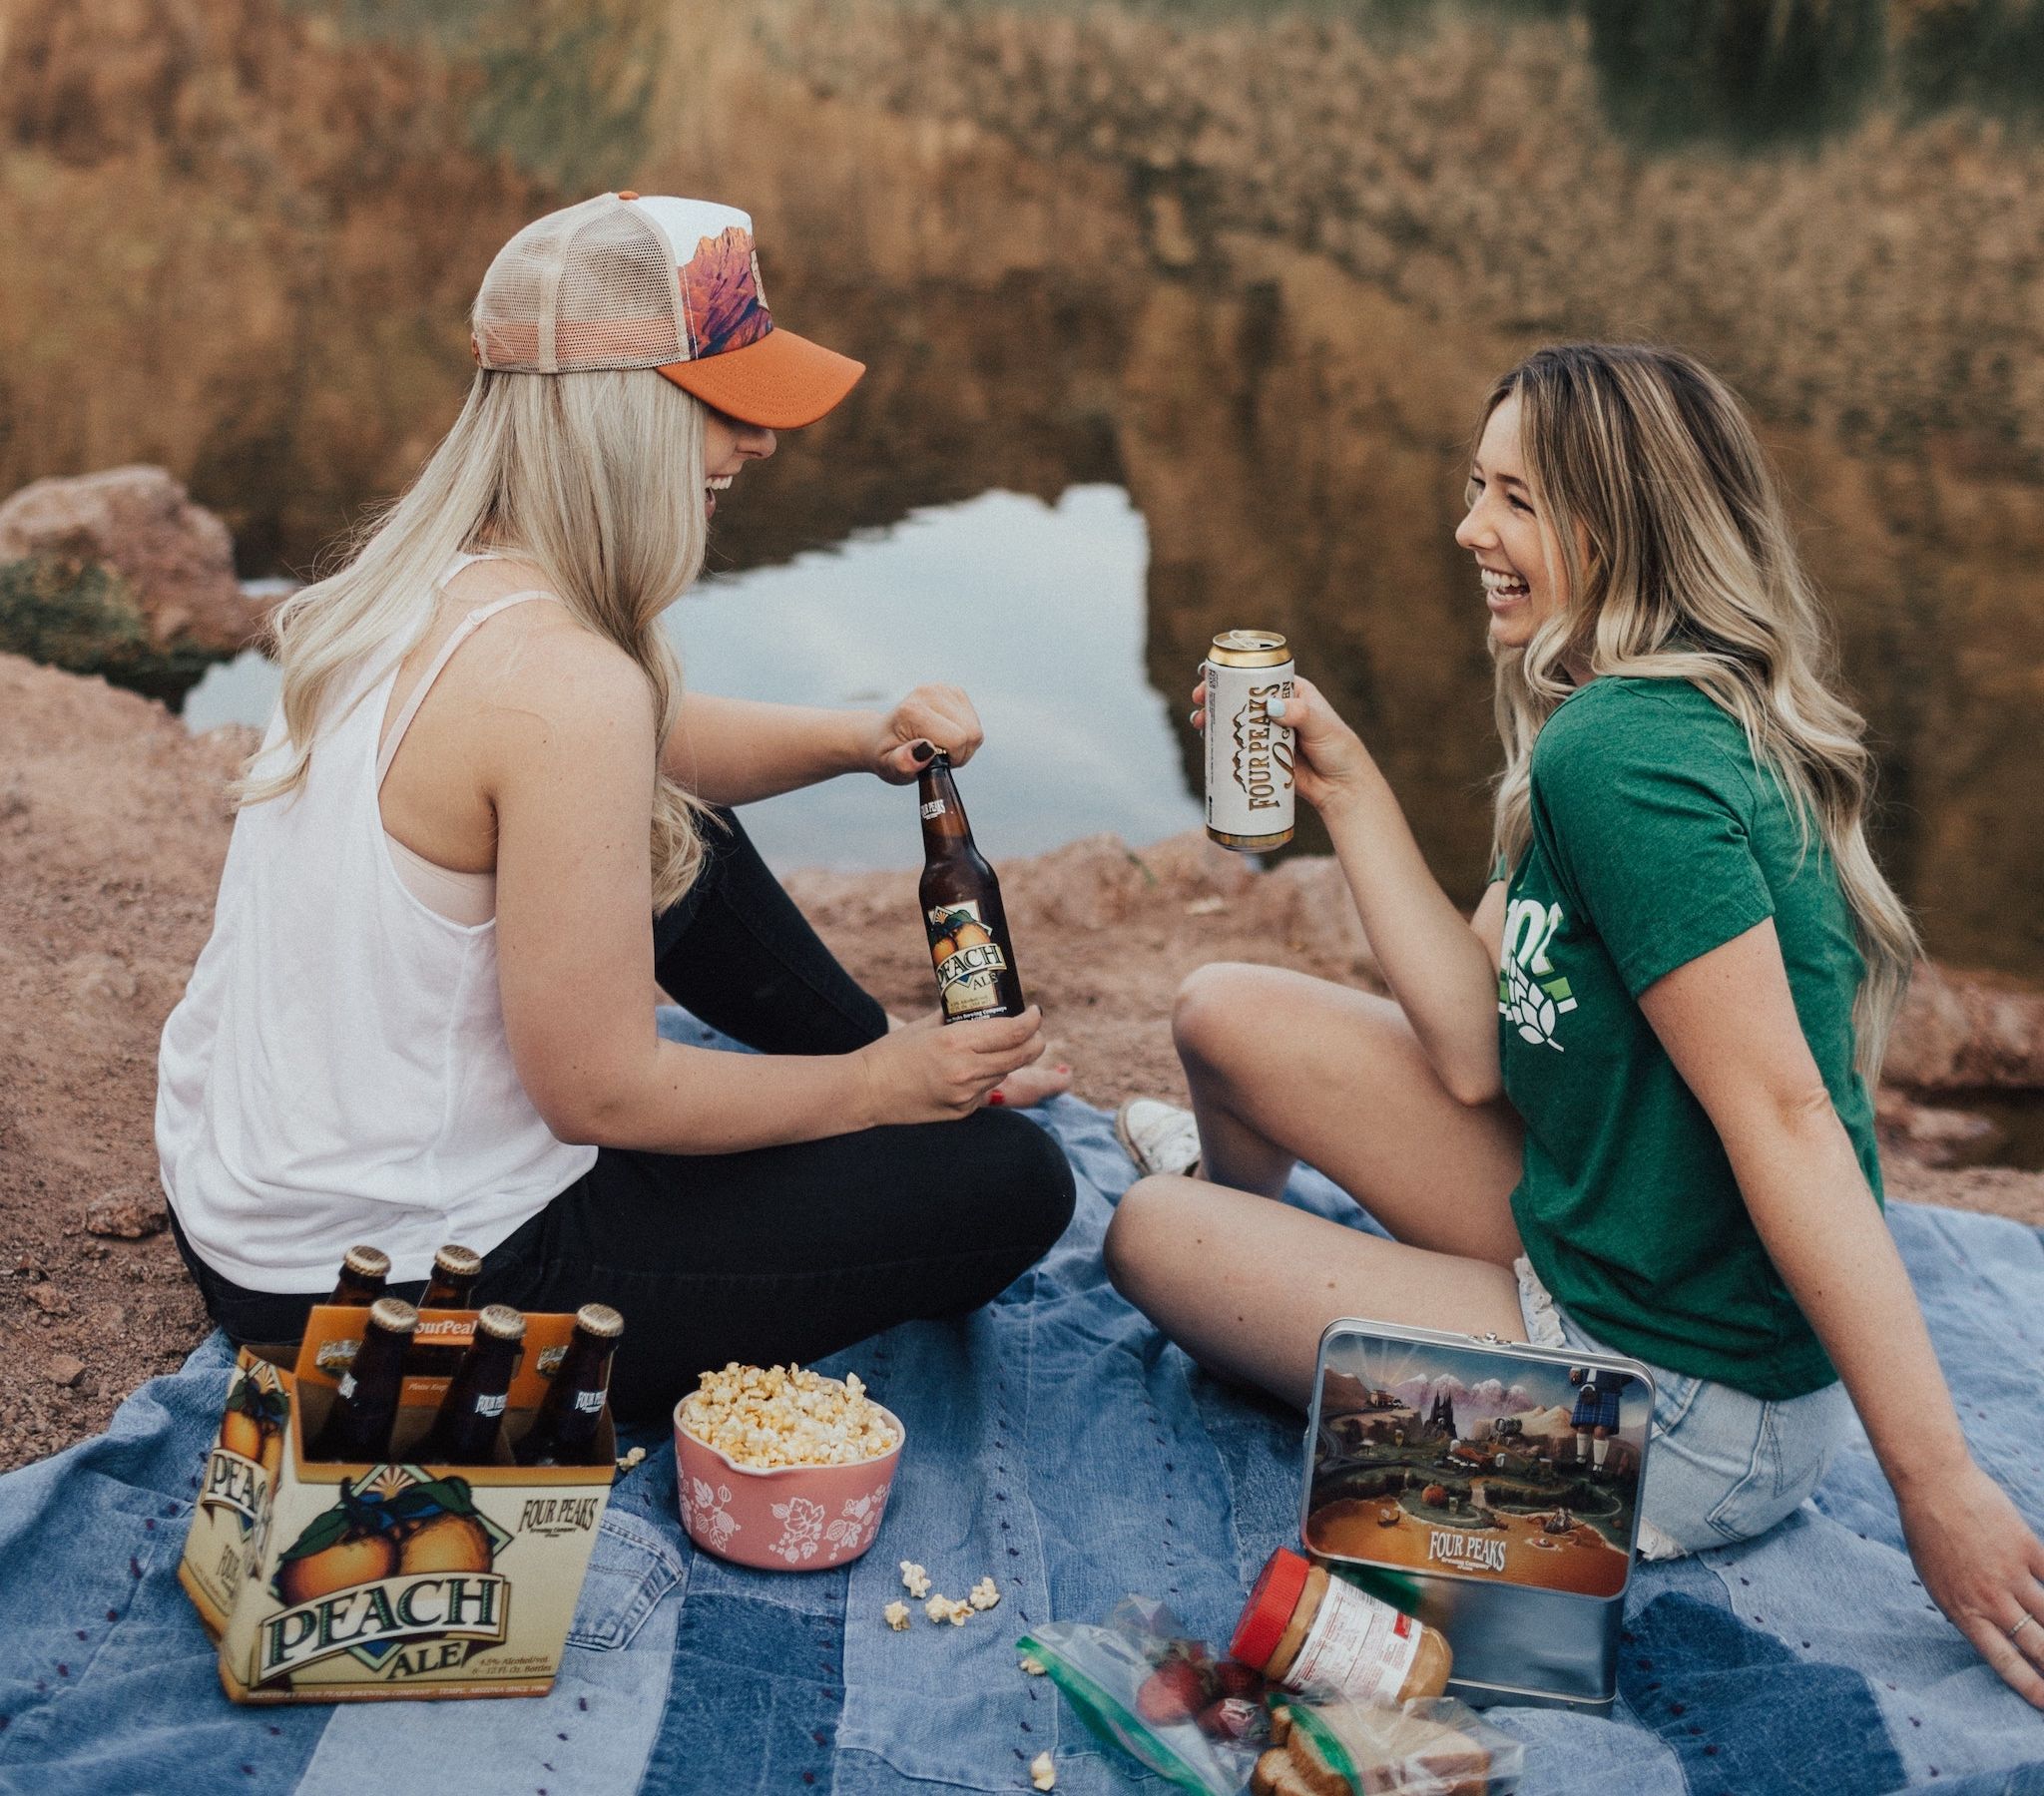 Two girls having a picnic outdoors with food and drinks